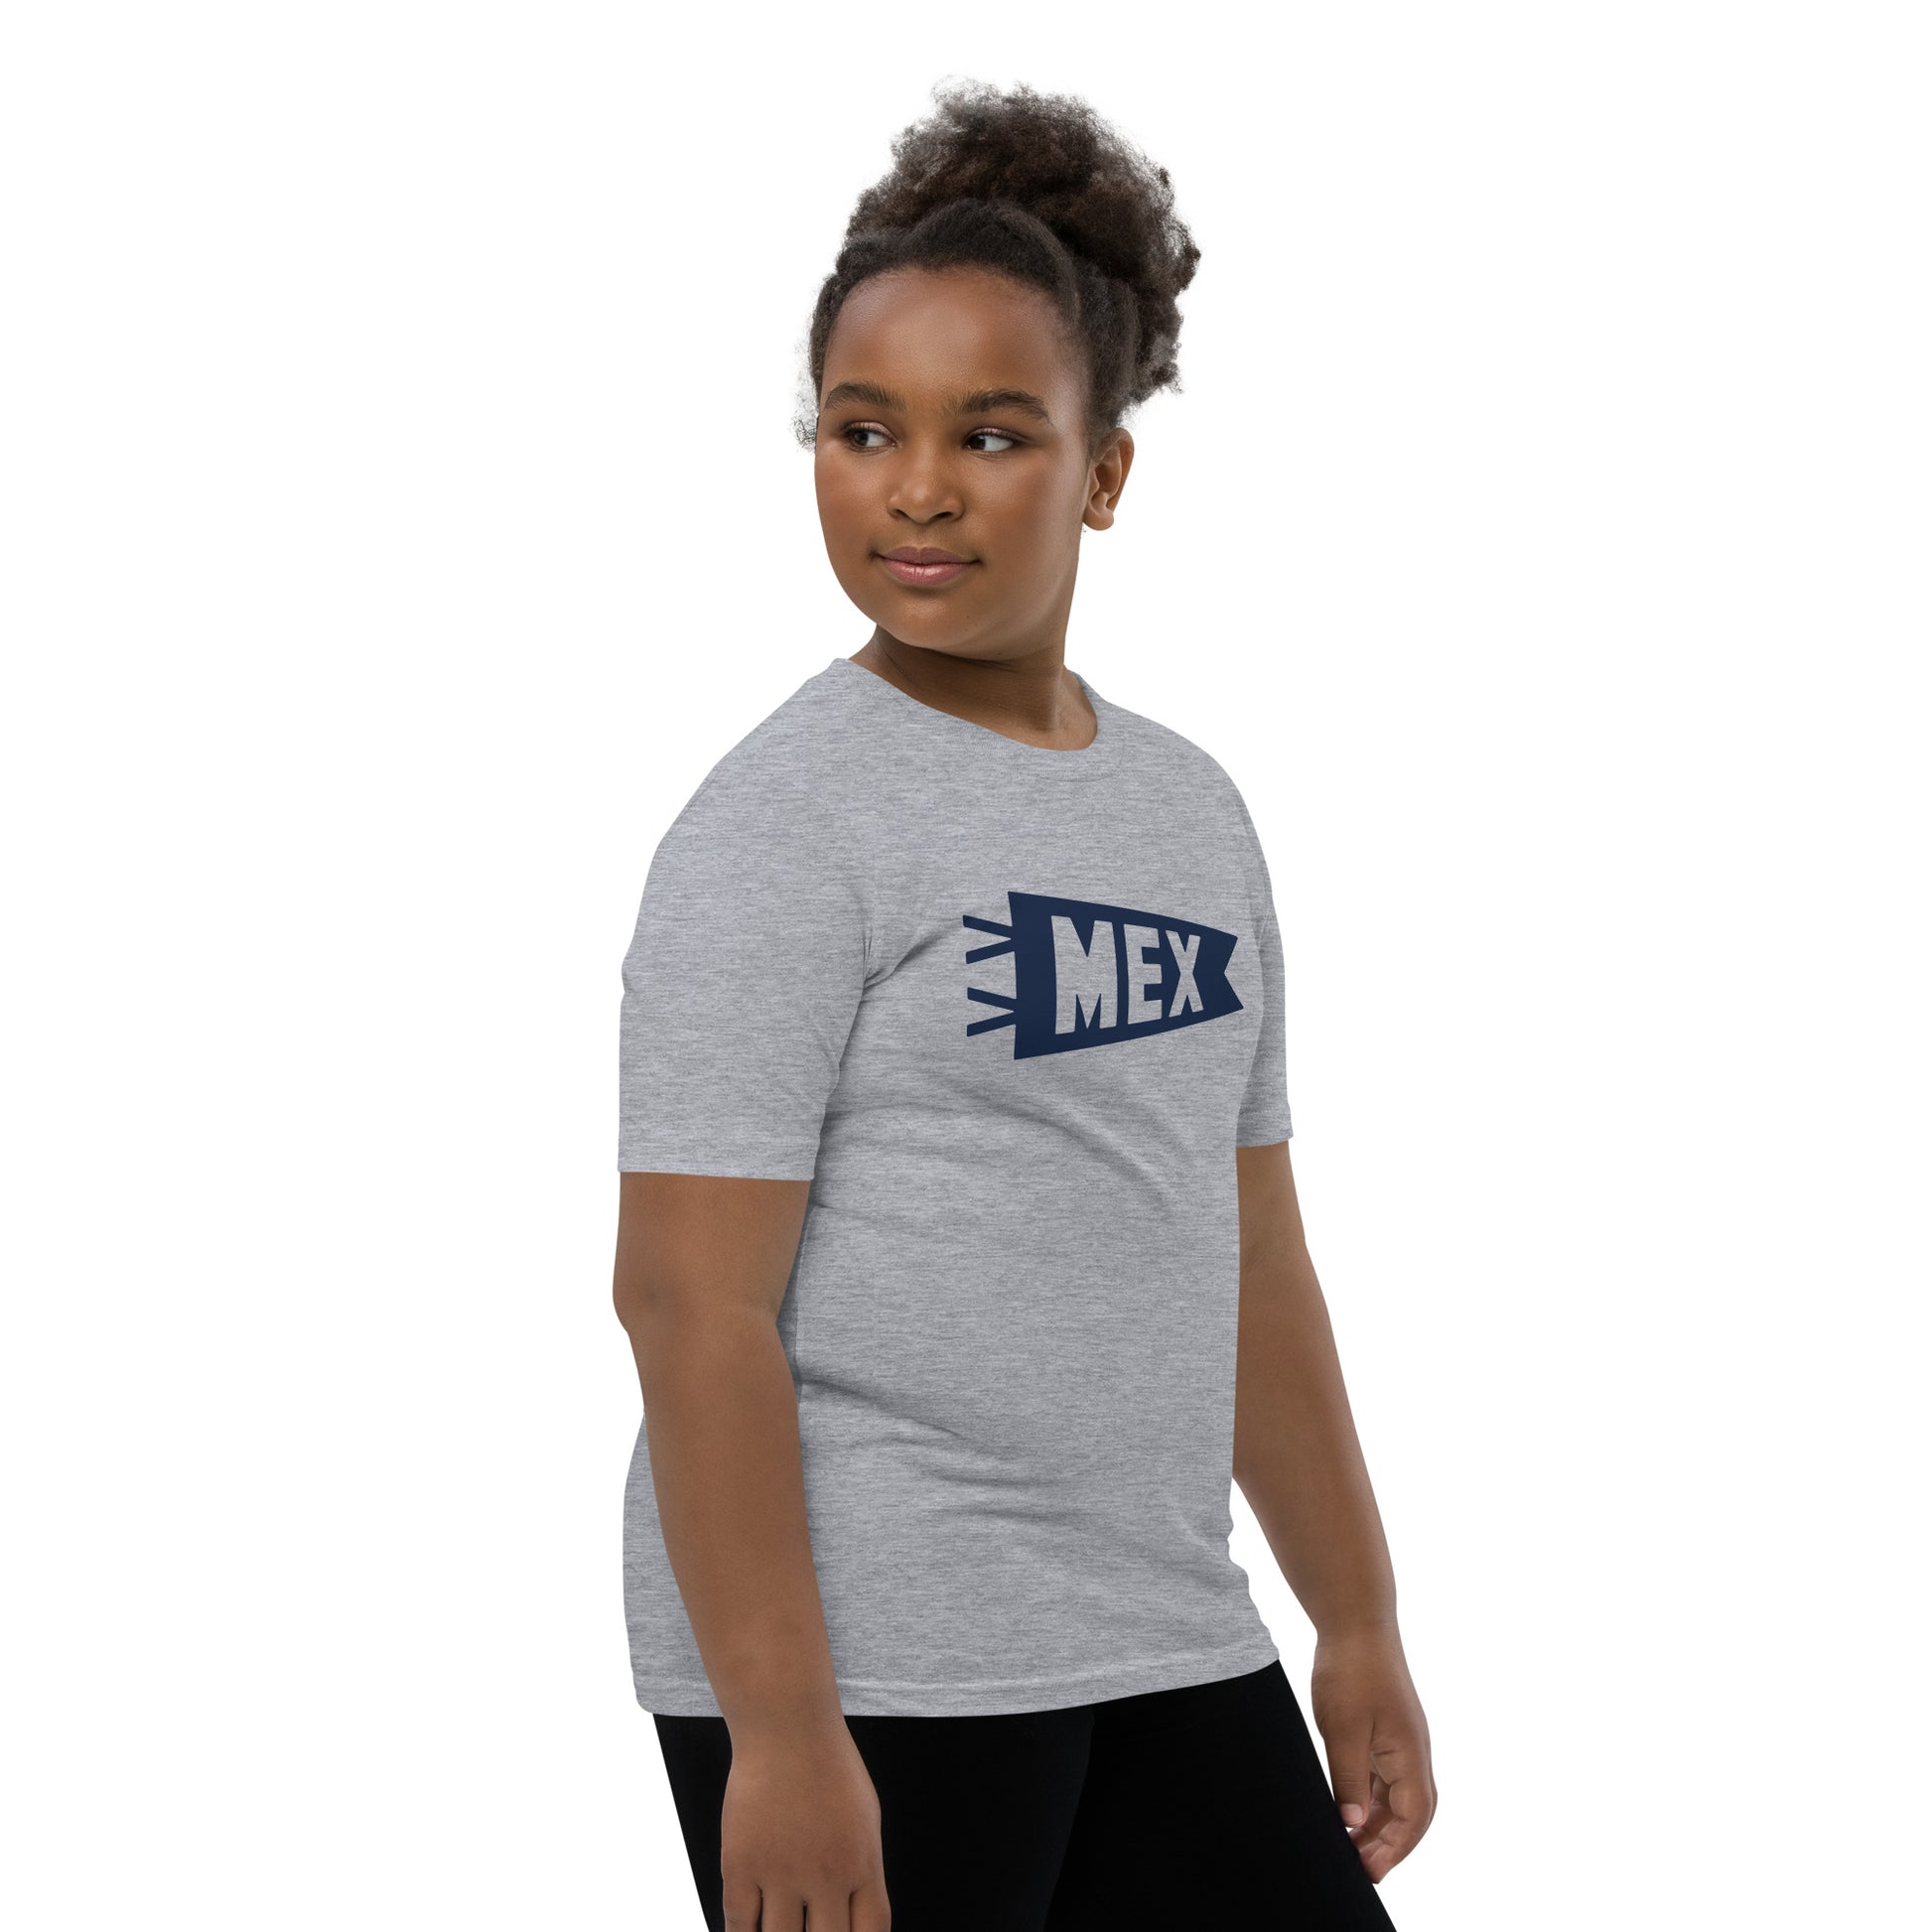 Kid's Airport Code Tee - Navy Blue Graphic • MEX Mexico City • YHM Designs - Image 03